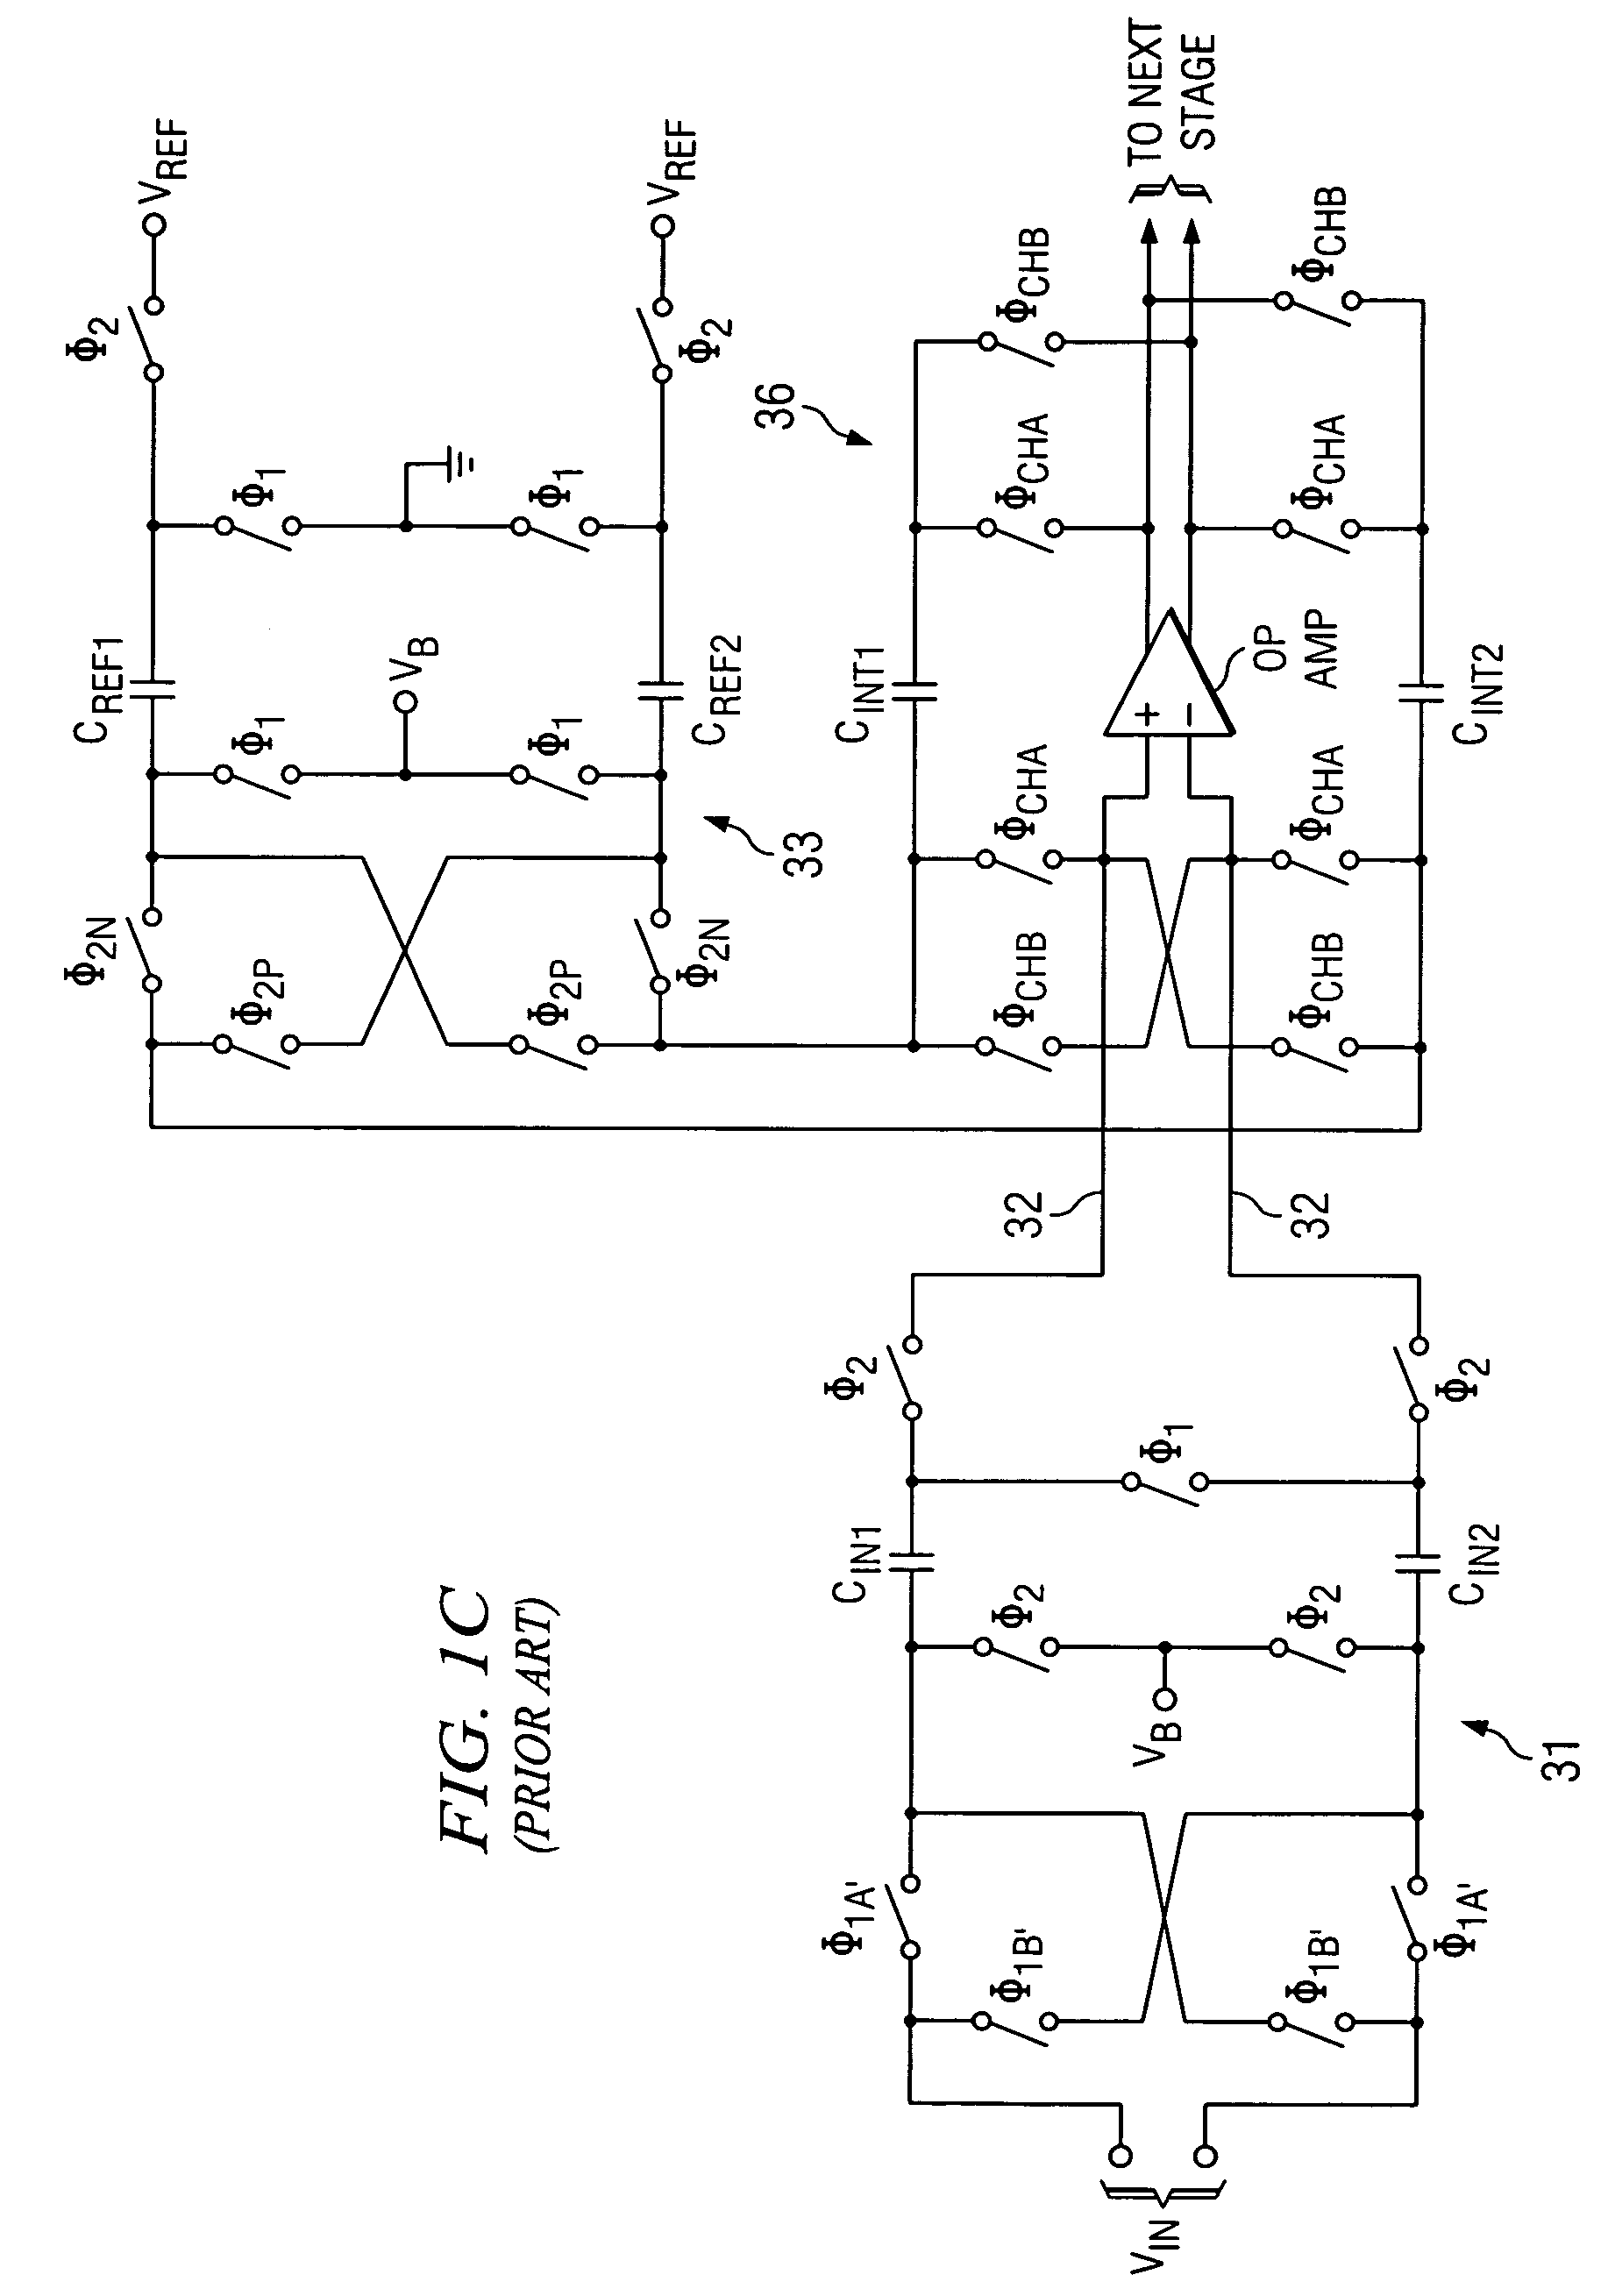 Oversampling analog-to-digital converter and method with reduced chopping residue noise